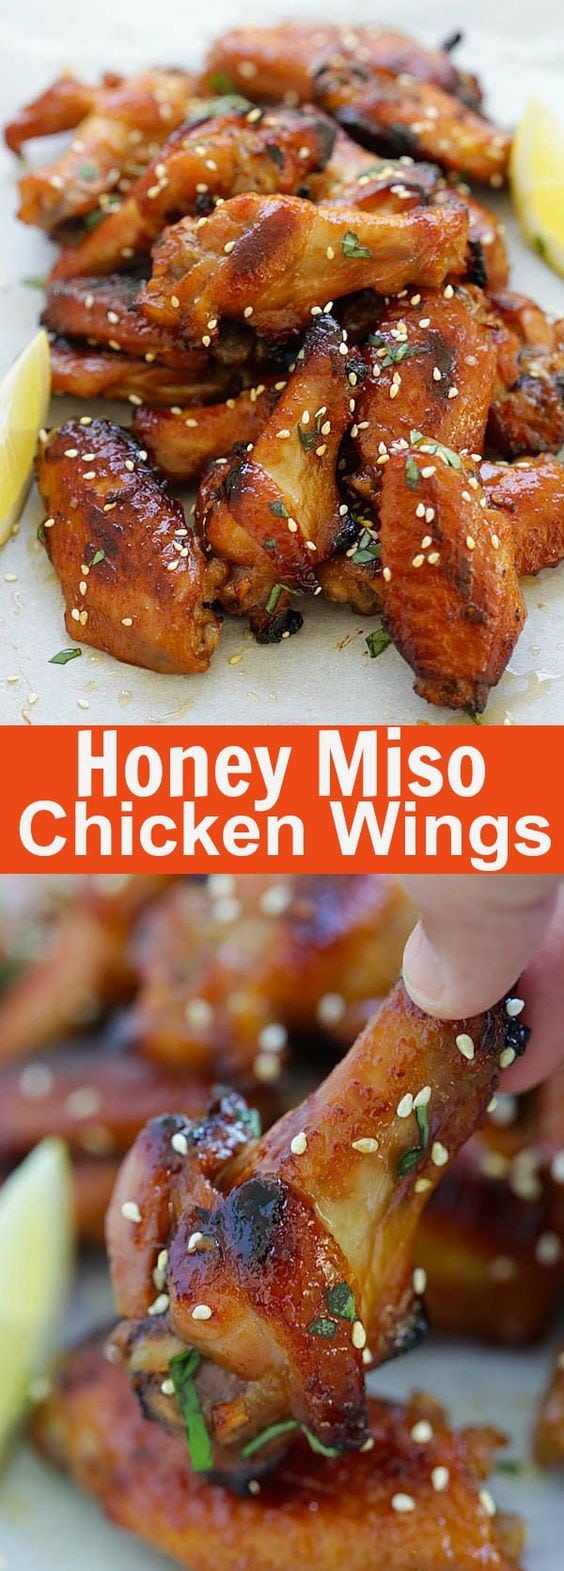 Honey Miso Chicken Wings - sweet and savory Japanese-flavored chicken wings with miso and honey. So good you can't stop eating | rasamalaysia.com